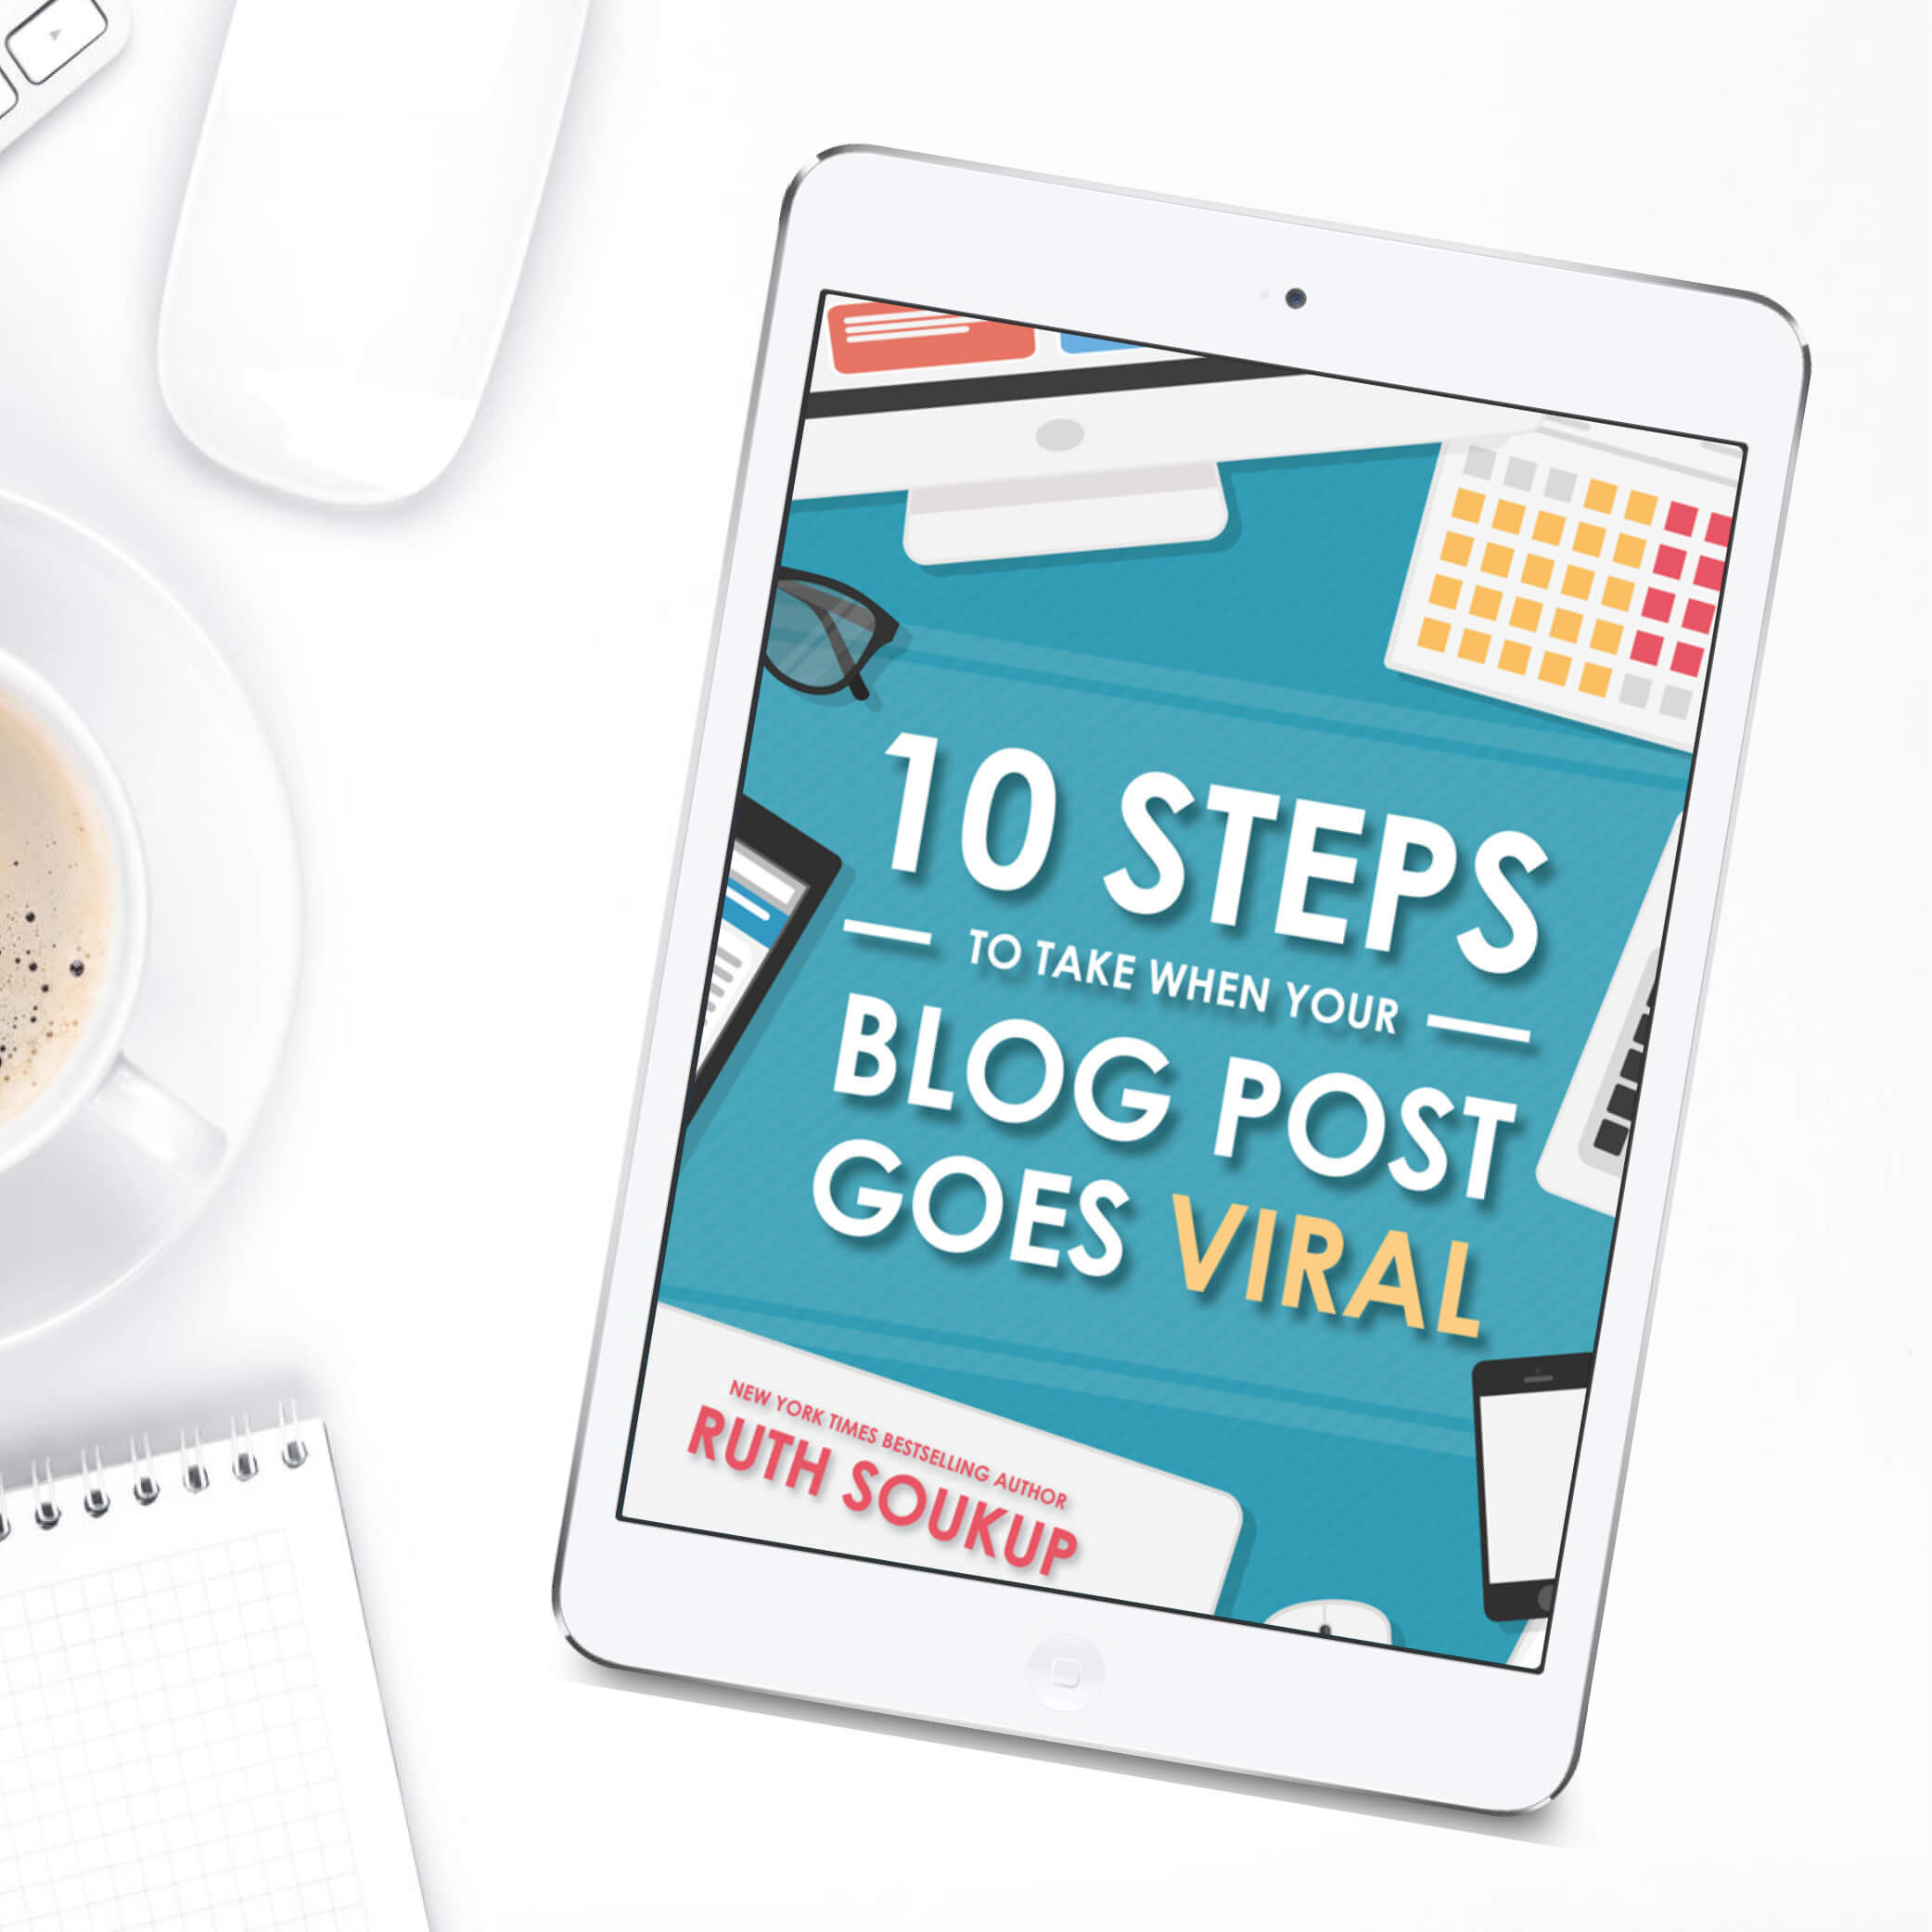 10 Steps To Take When A Post Goes Viral